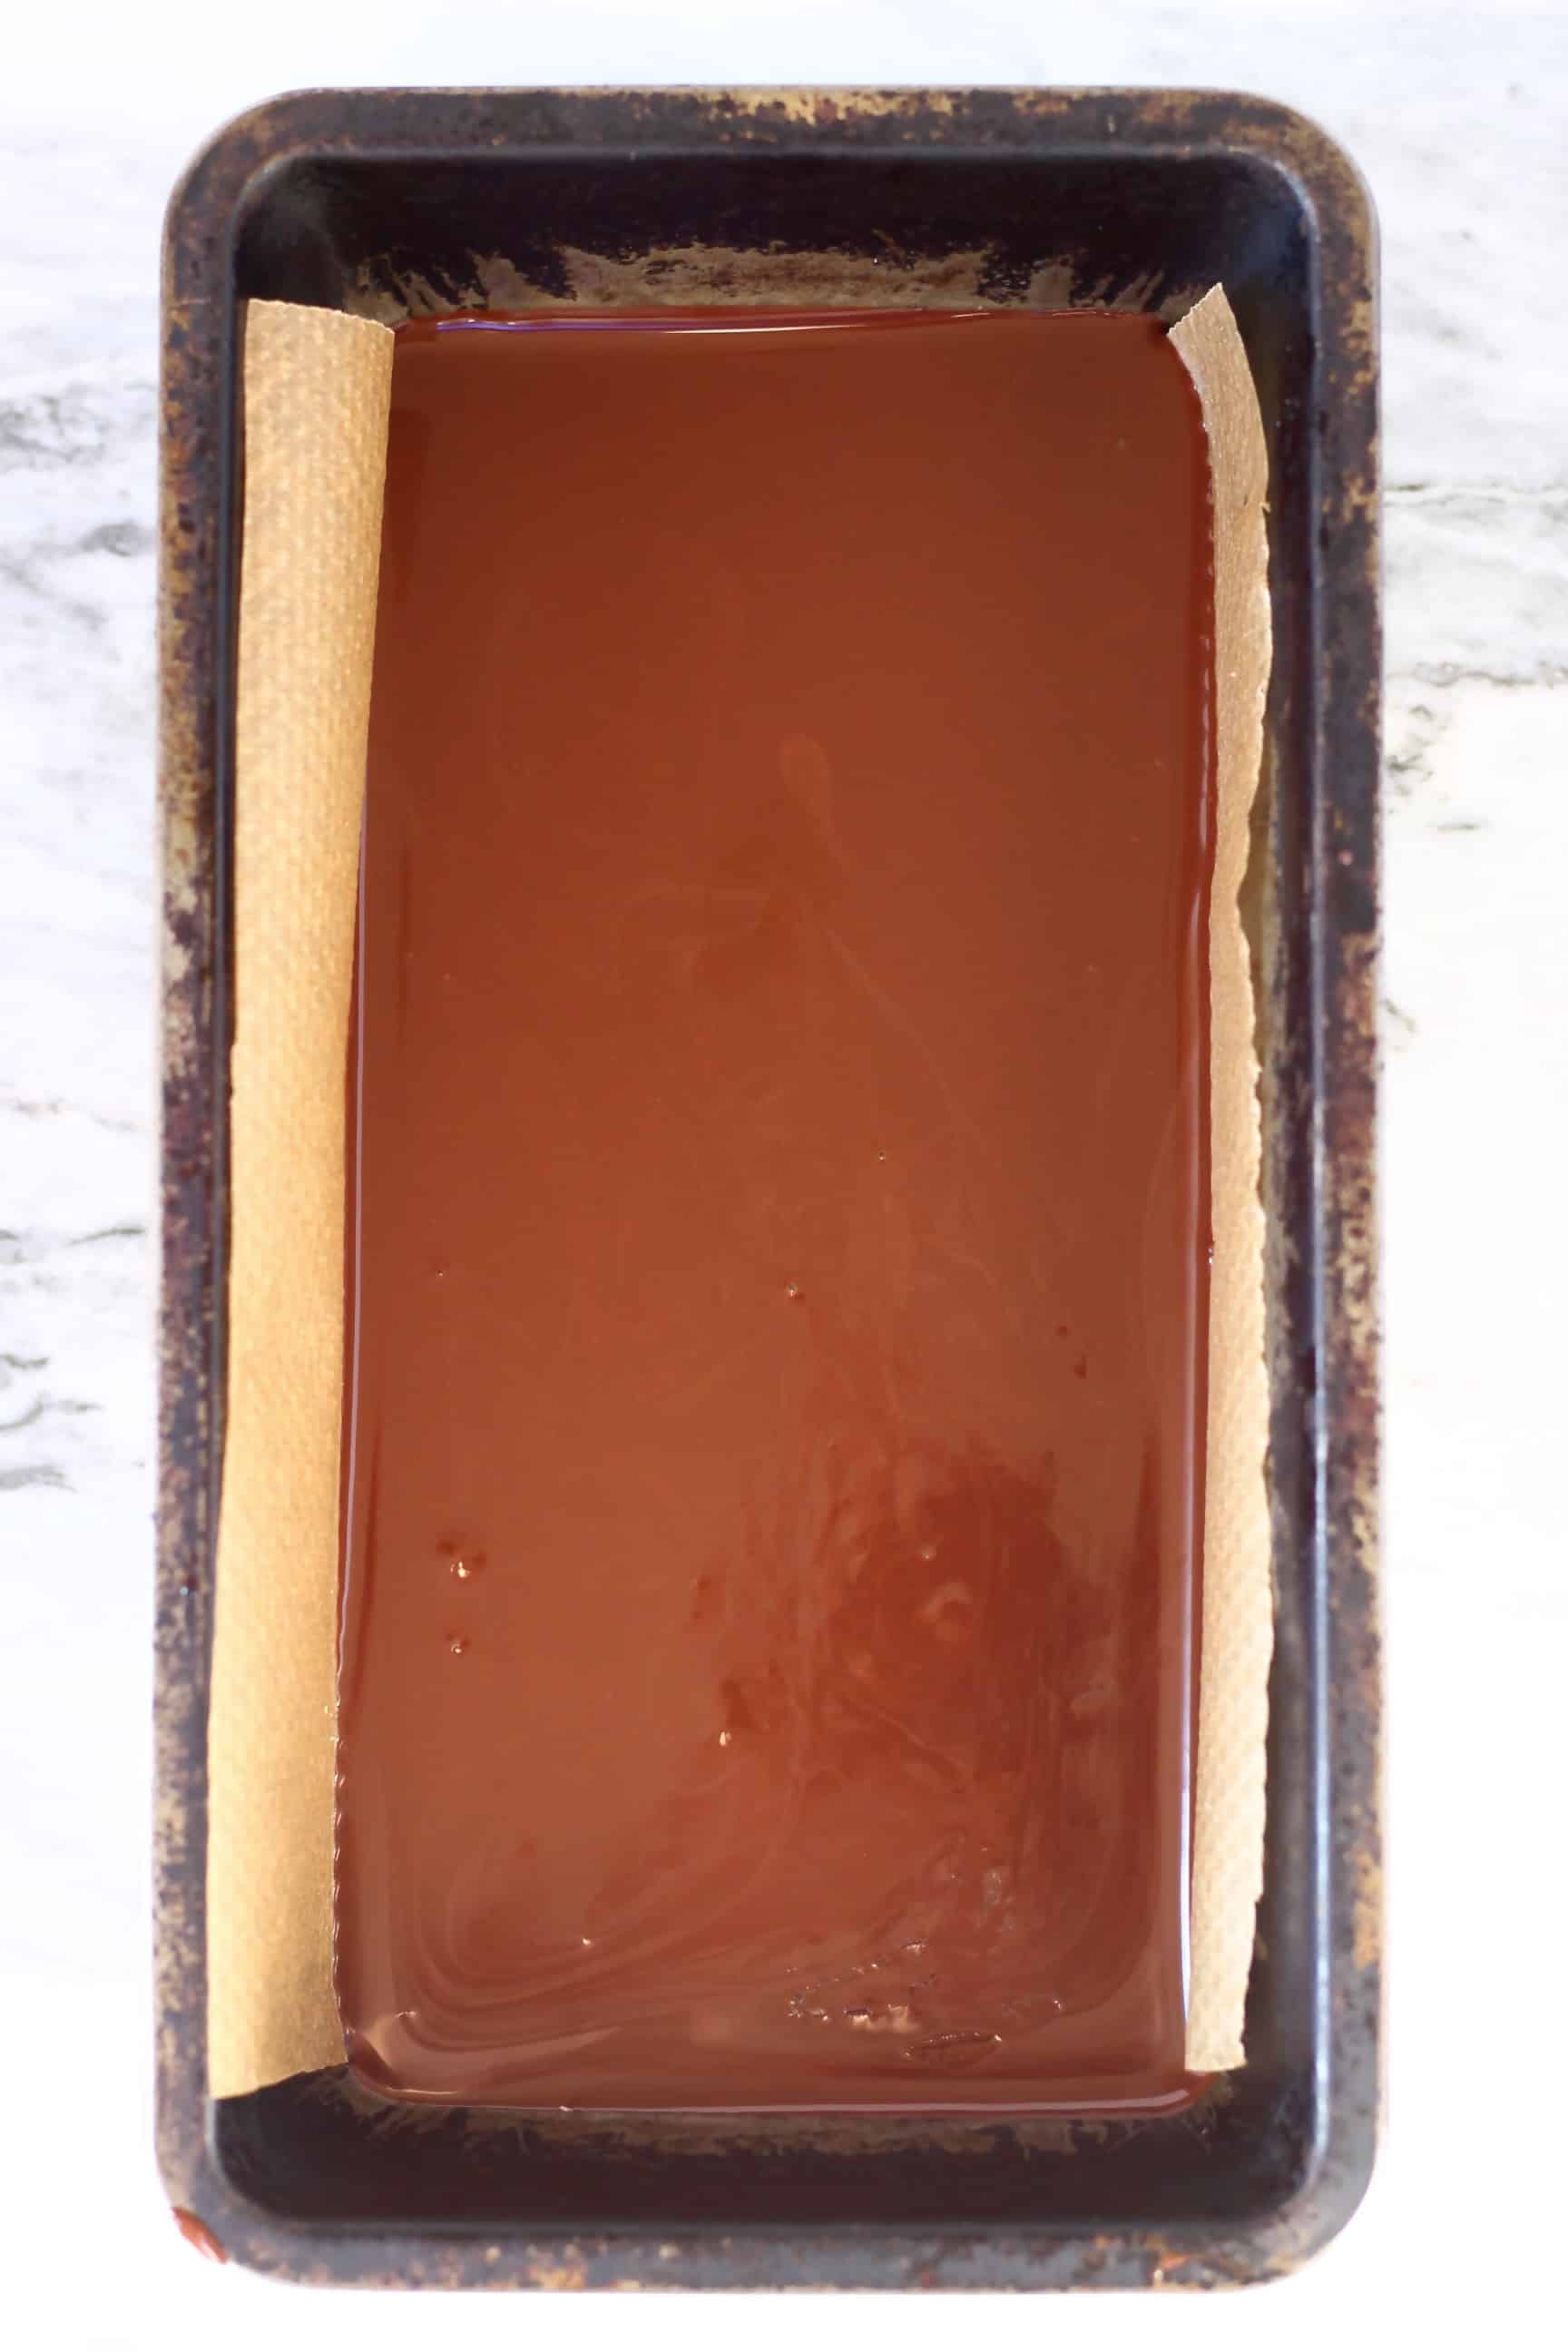 Melted chocolate for peanut butter bars in a loaf tin